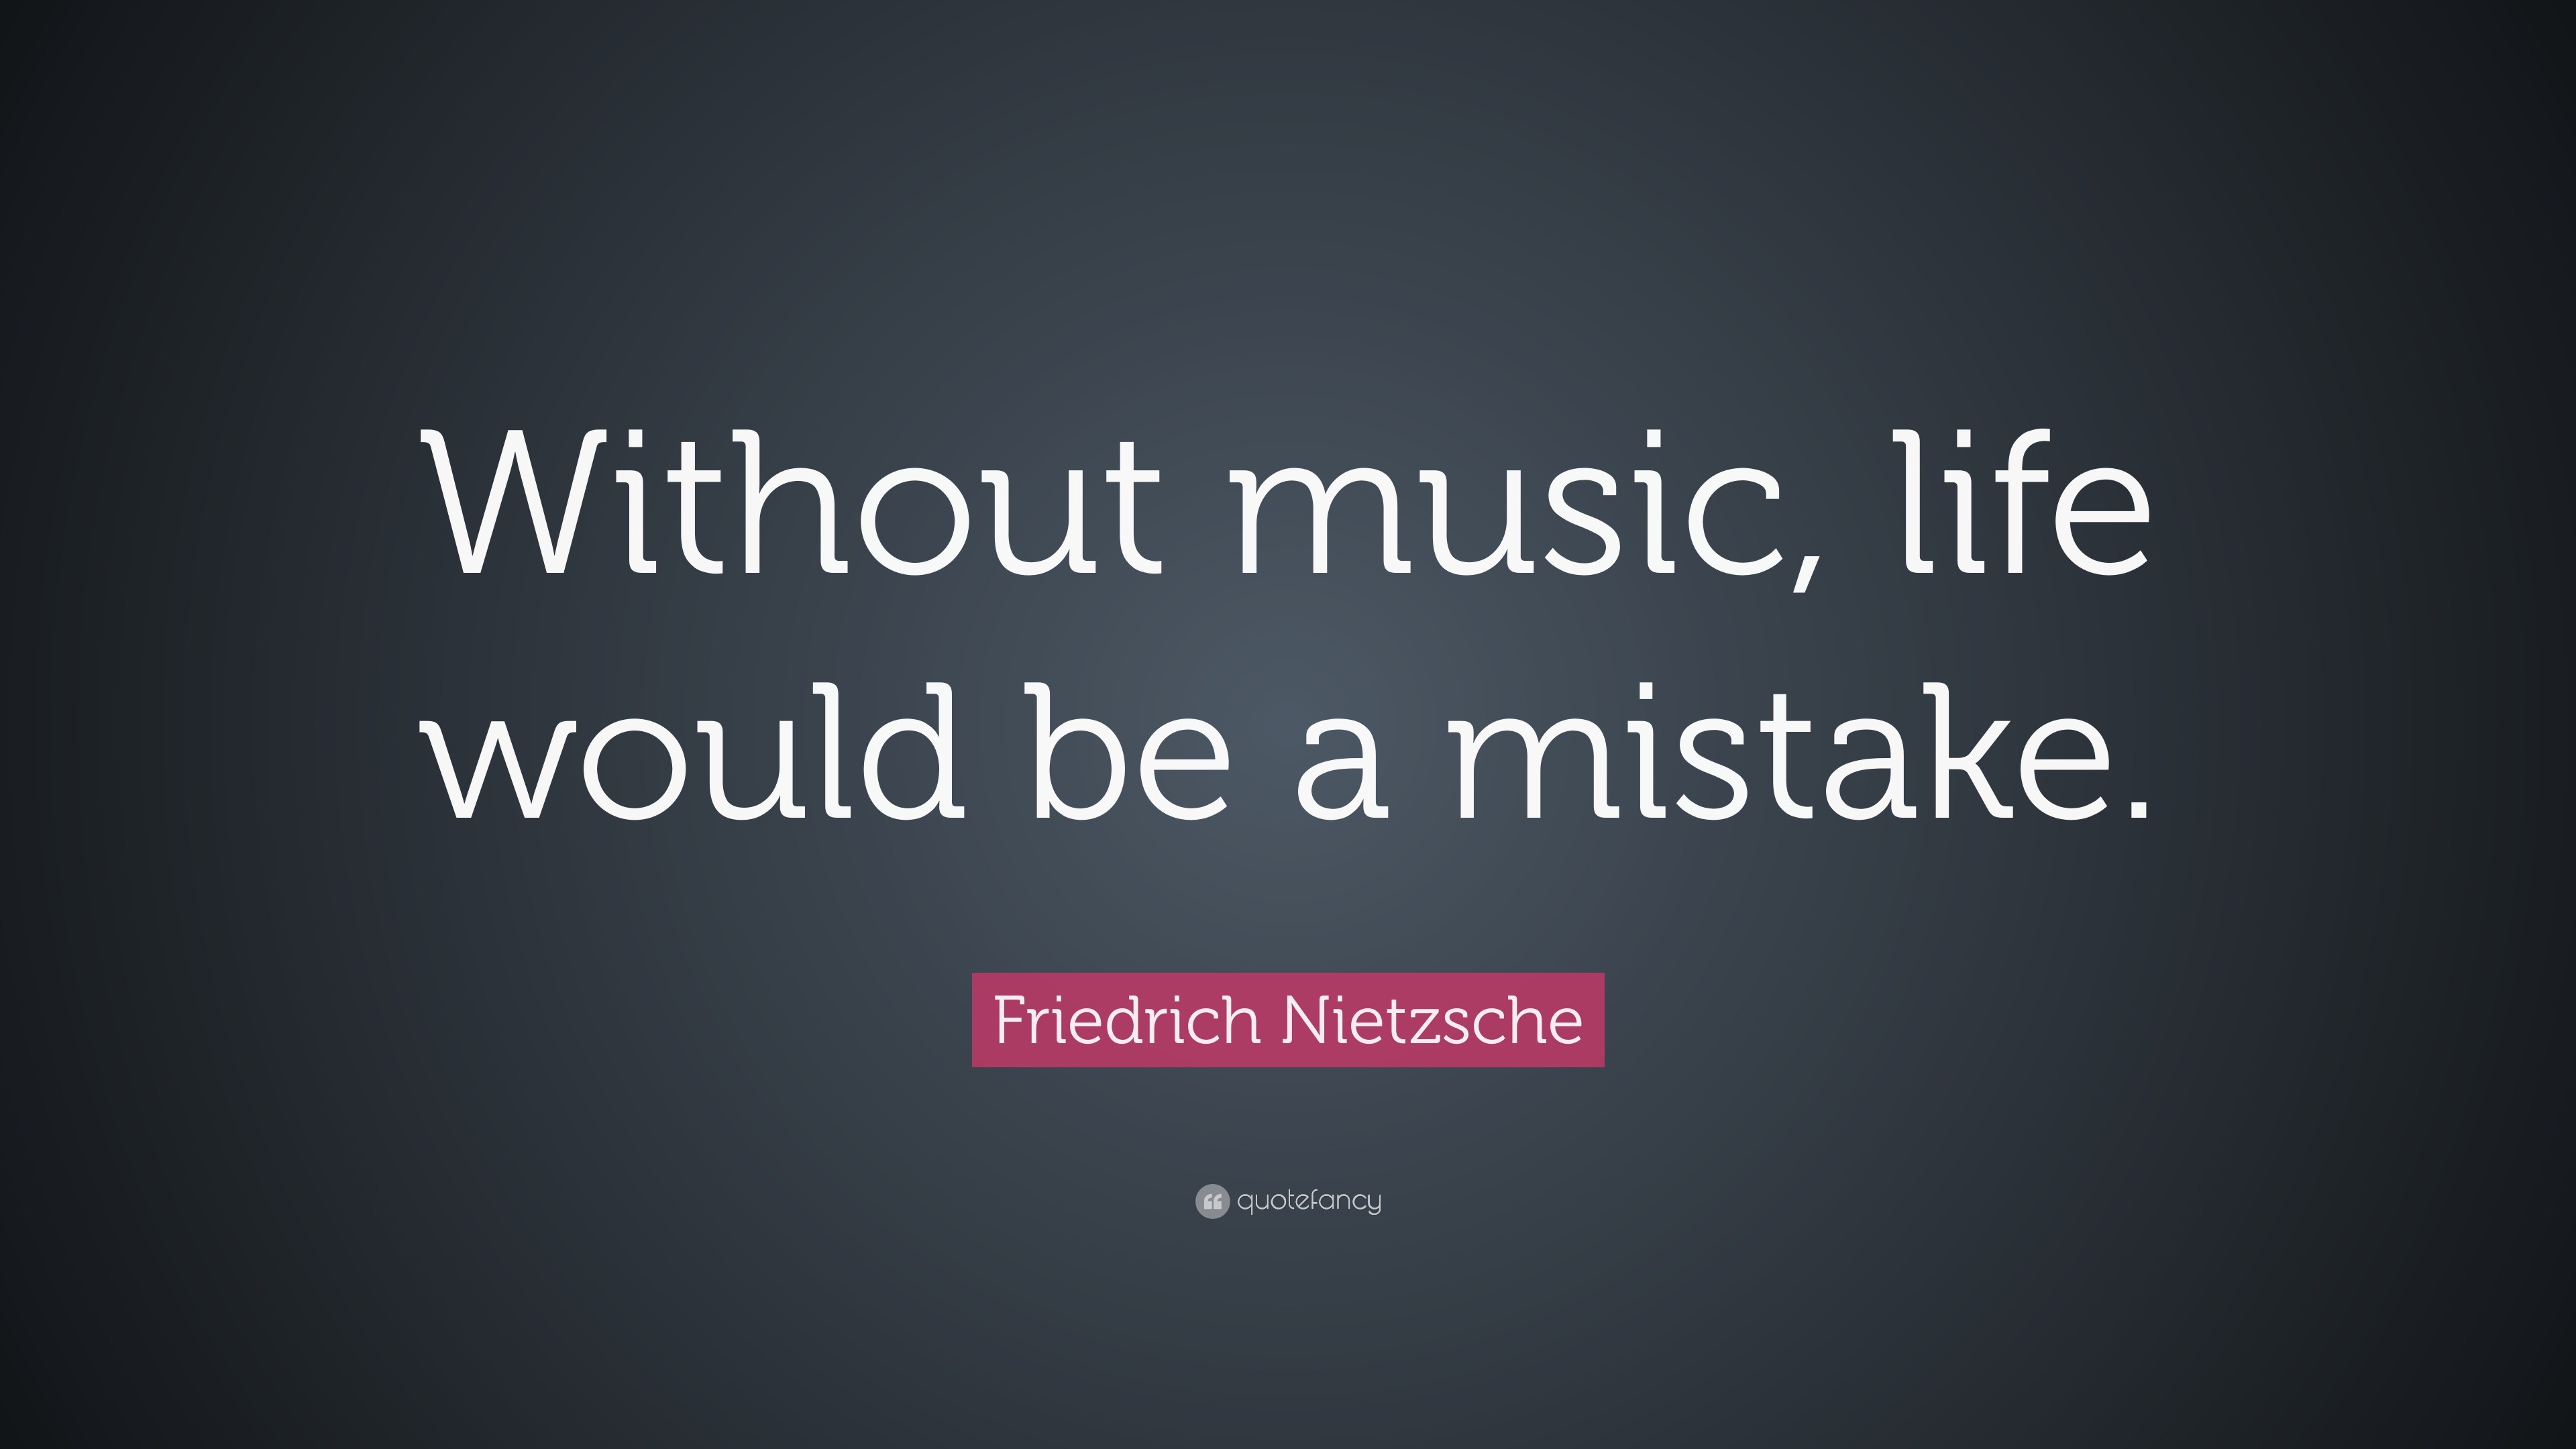 Friedrich Nietzsche Quote: "Without music, life would be a ...